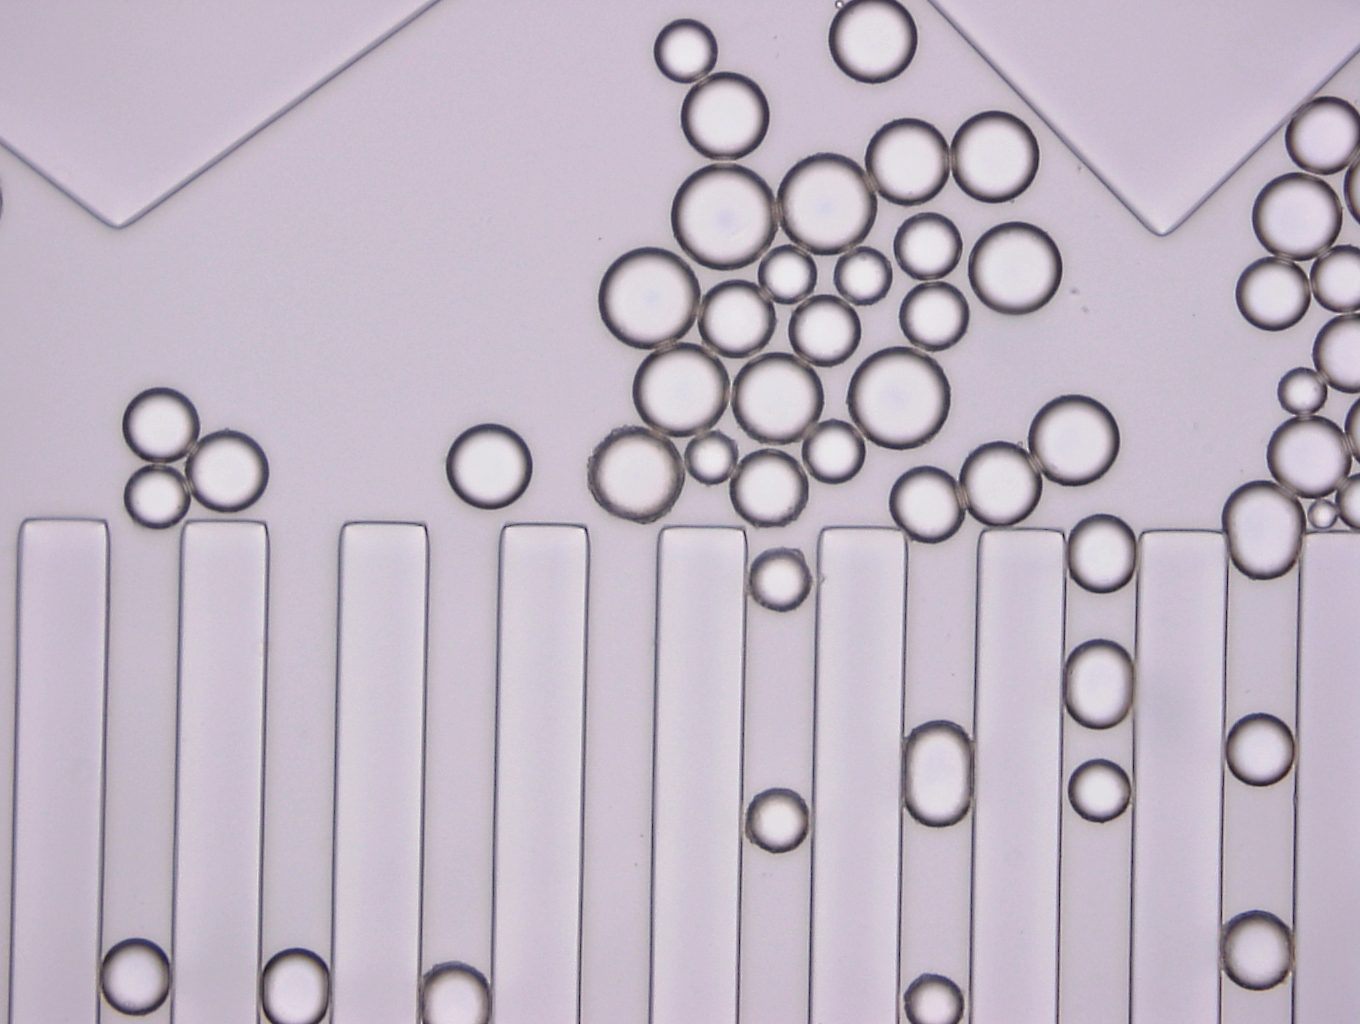 In the figure below vesicles are led into a grid by funnel shaped structures in the flow chamber (top).